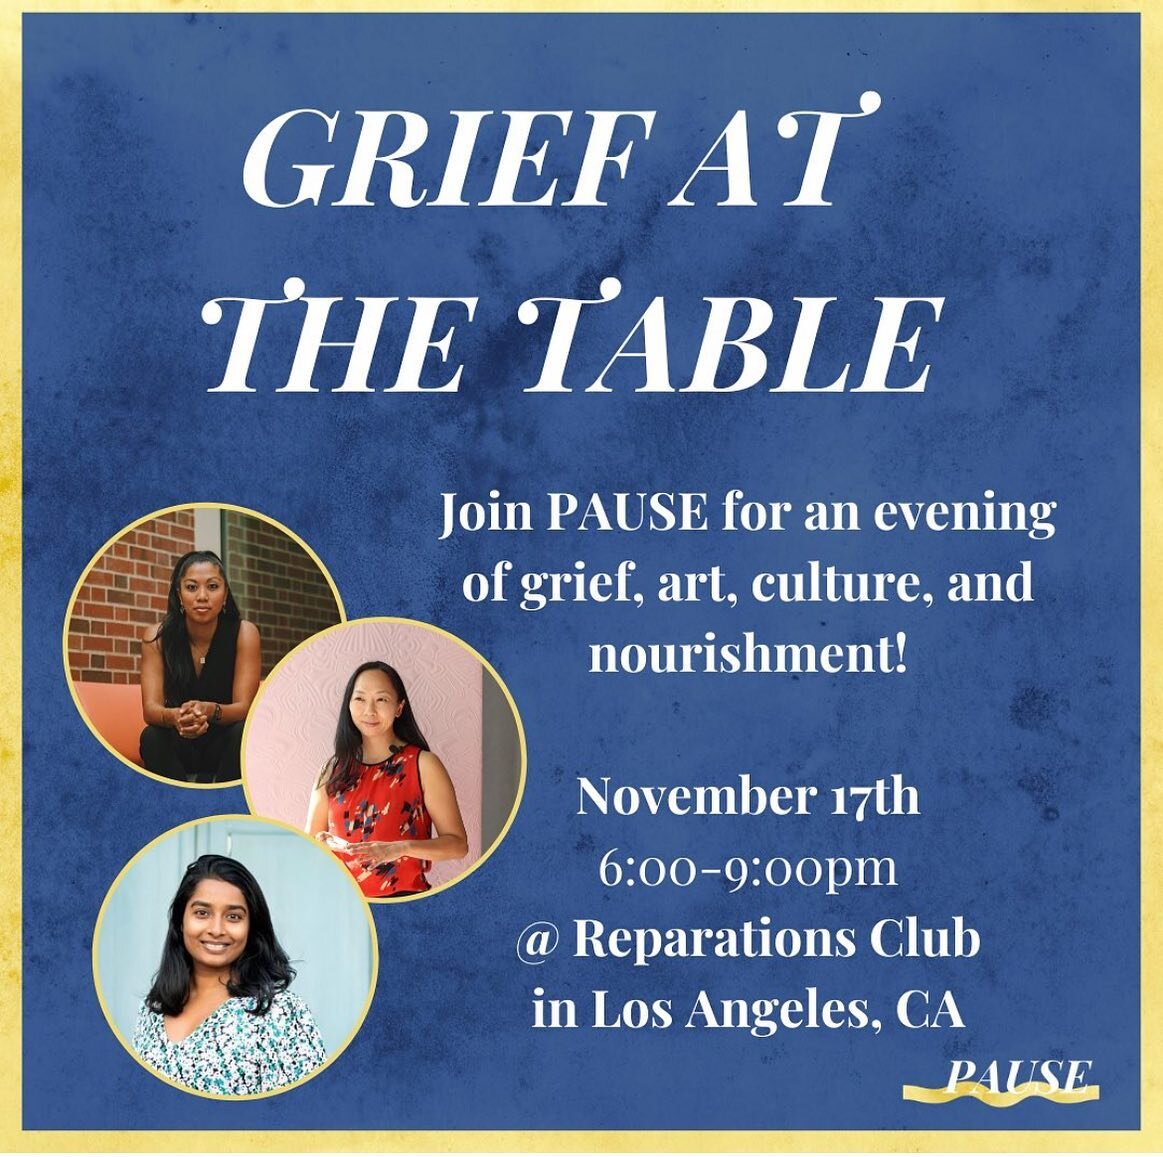 It is always a good time to talk about grief and gather and be in community. We are looking forward to being in Los Angeles next week and meeting, sharing, dreaming and collaborating with so many amazing deeply creative and thoughtful people. Come sa